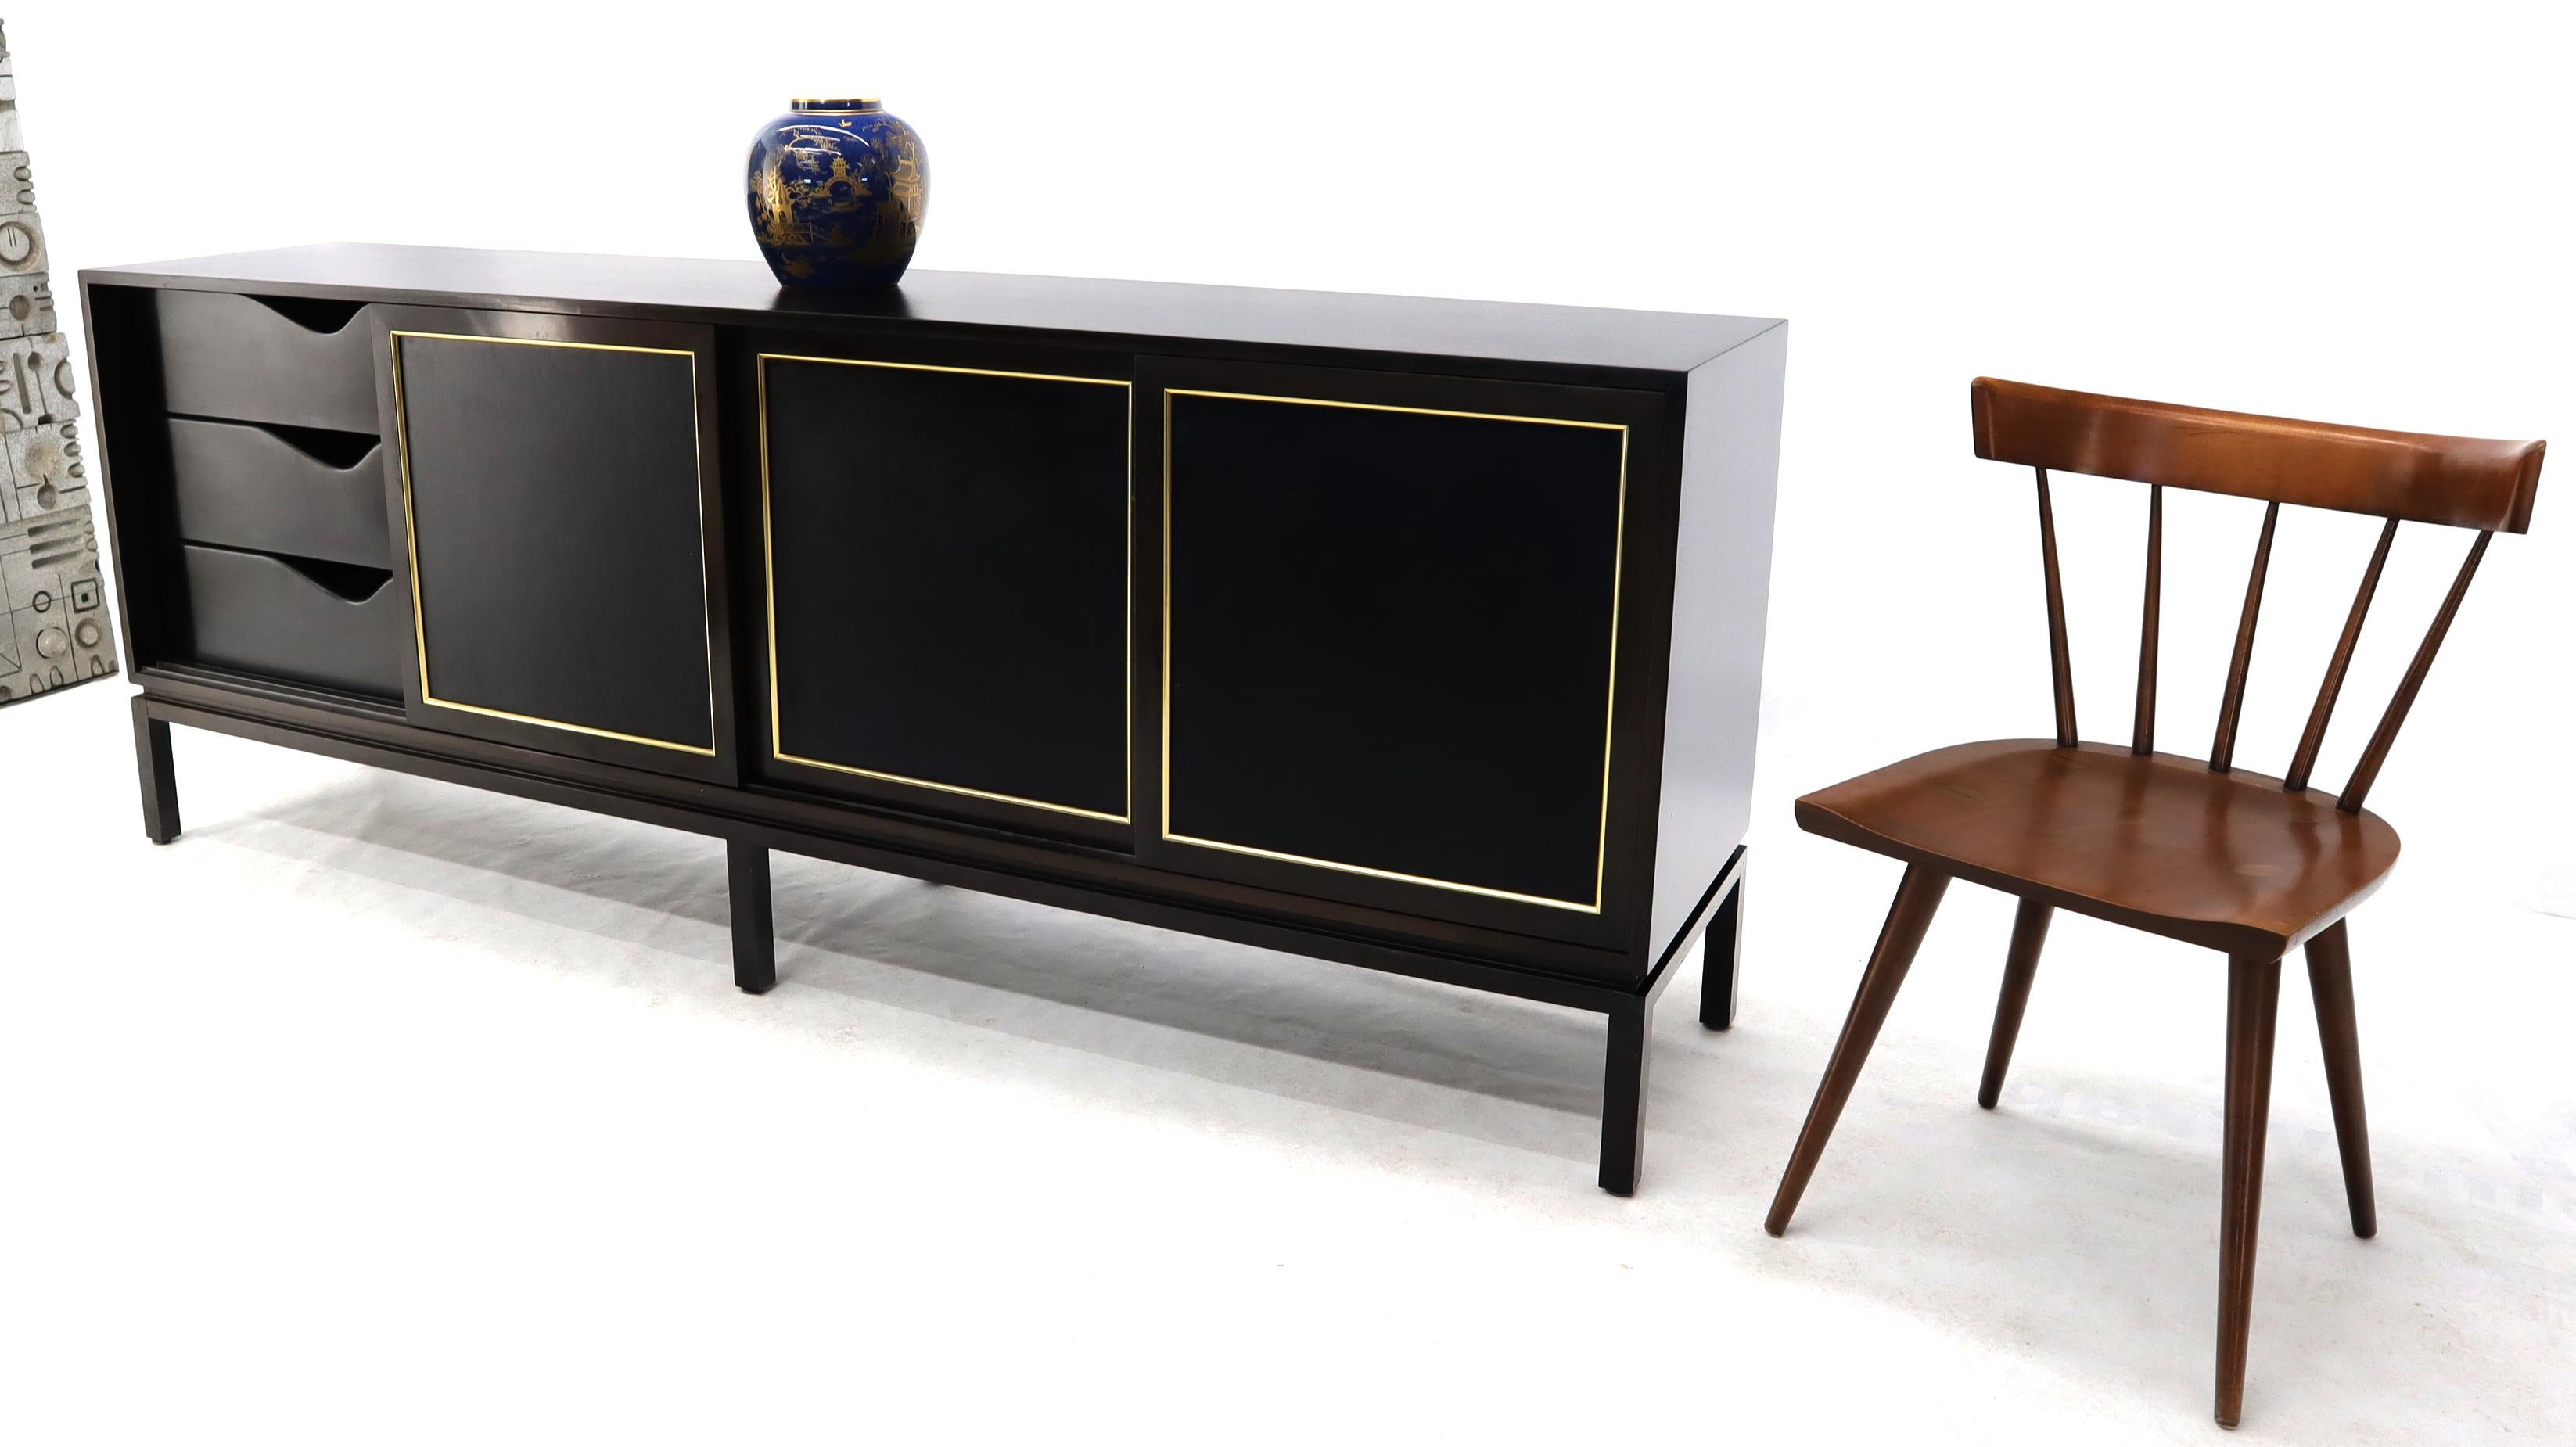 Mid-Century Modern 4 brass and leather sliding doors 12 drawer long credenza by Harvey Probber. Very sharp looking piece in excellent vintage condition.